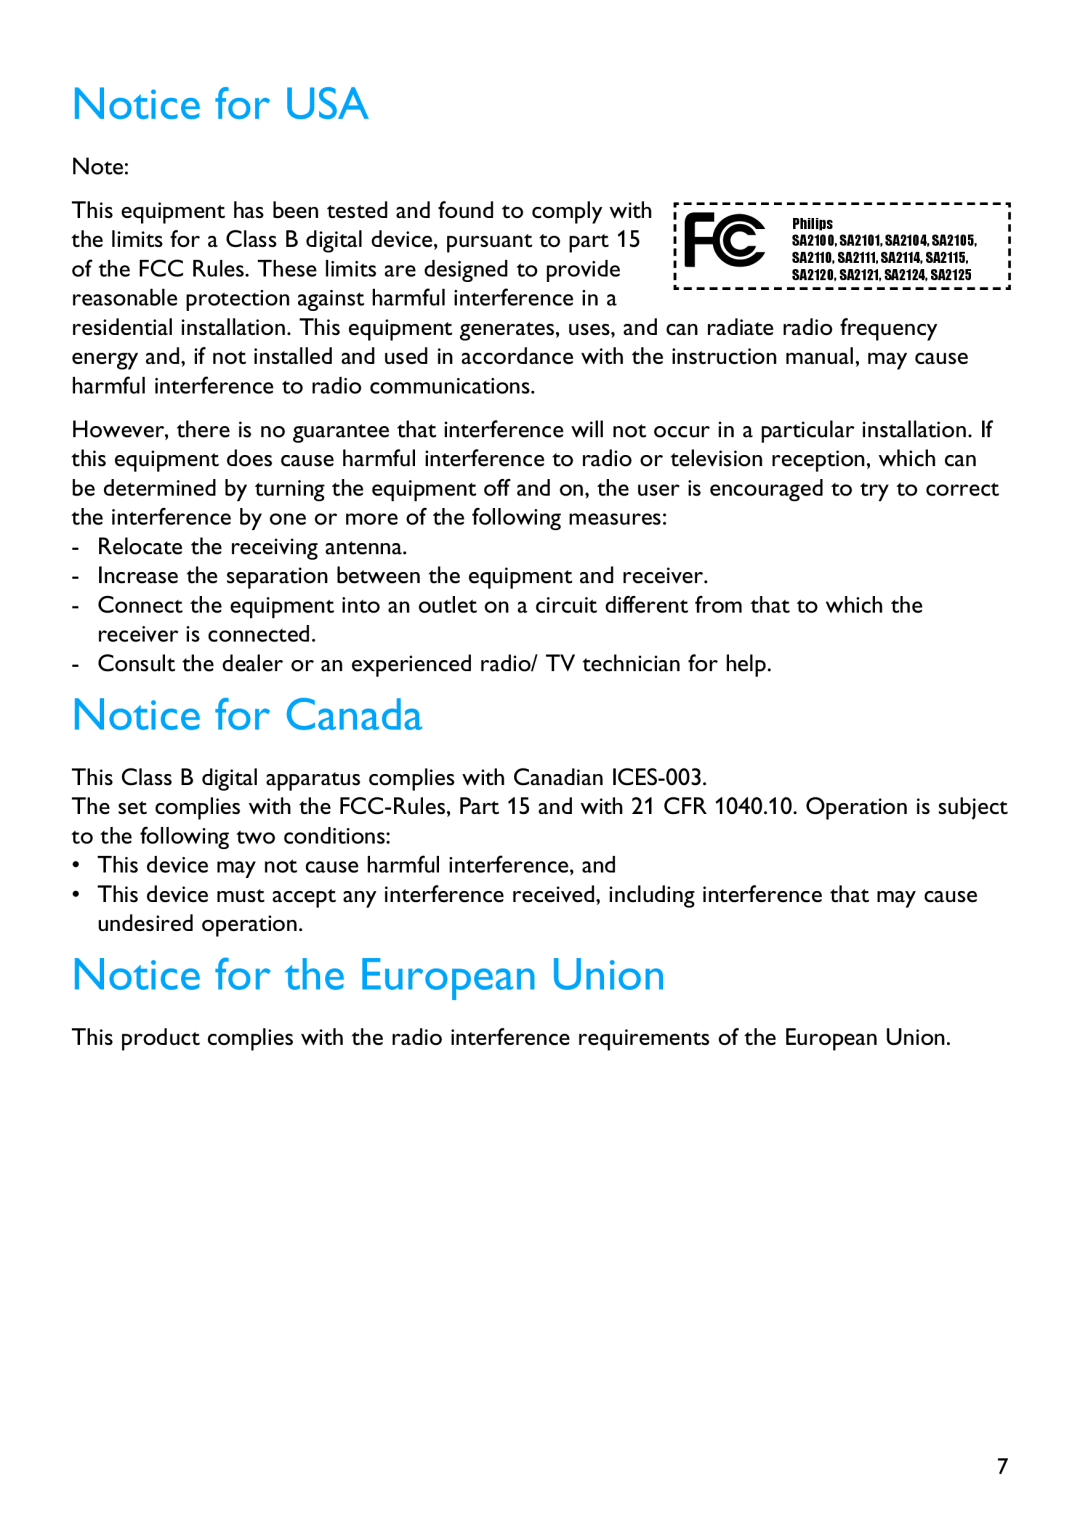 Philips SA2100 manual Notice for USA, Notice for Canada, Notice for the European Union 